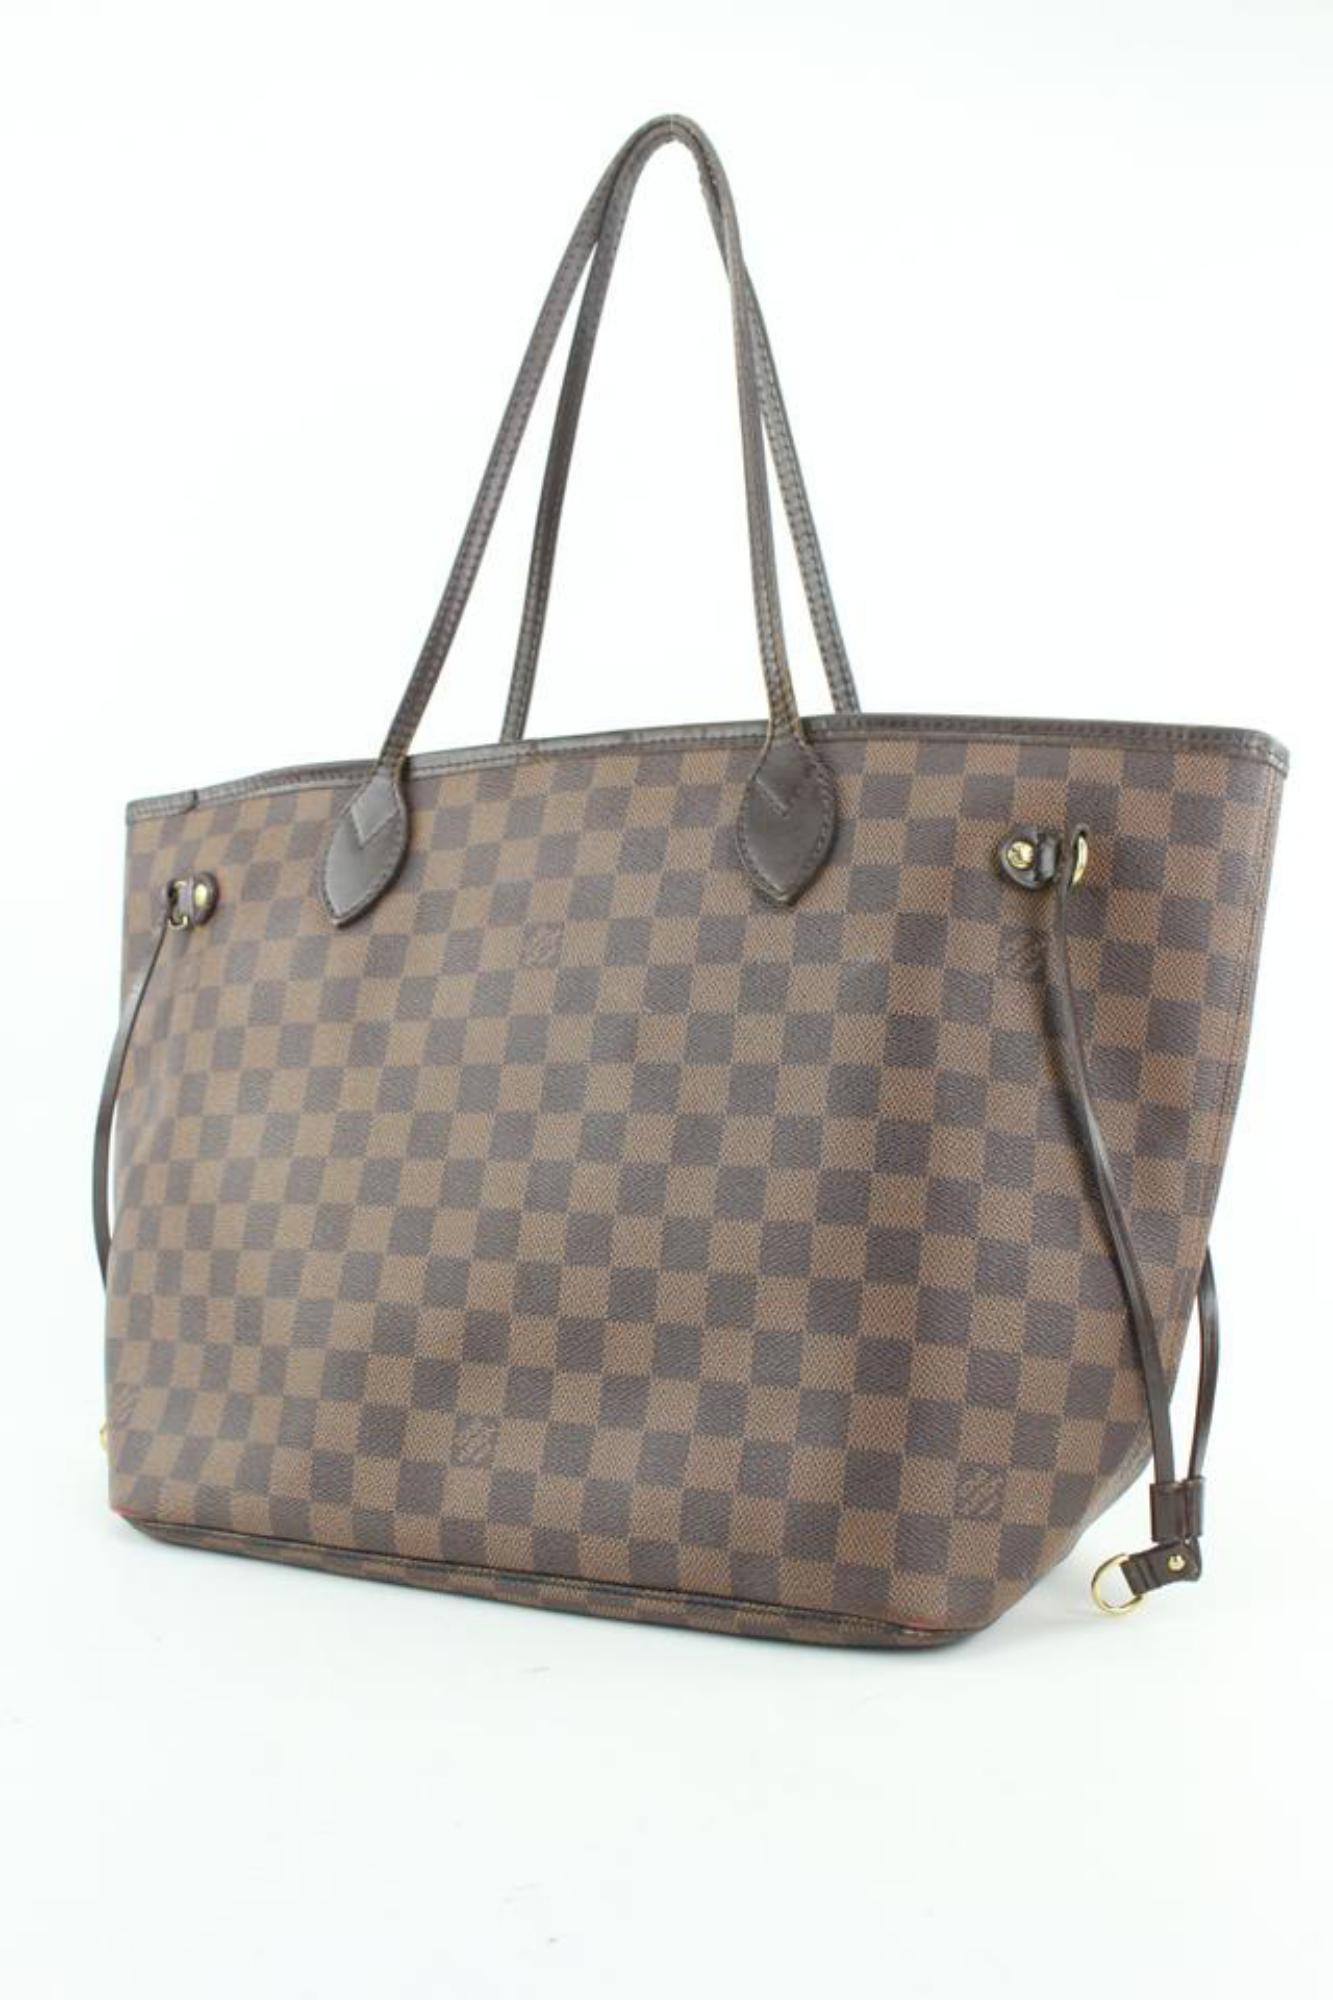 Louis Vuitton Damier Ebene Neverfull MM Tote Bag 1LV1228
Date Code/Serial Number: AR4040
Made In: France
Measurements: Length:  18.5